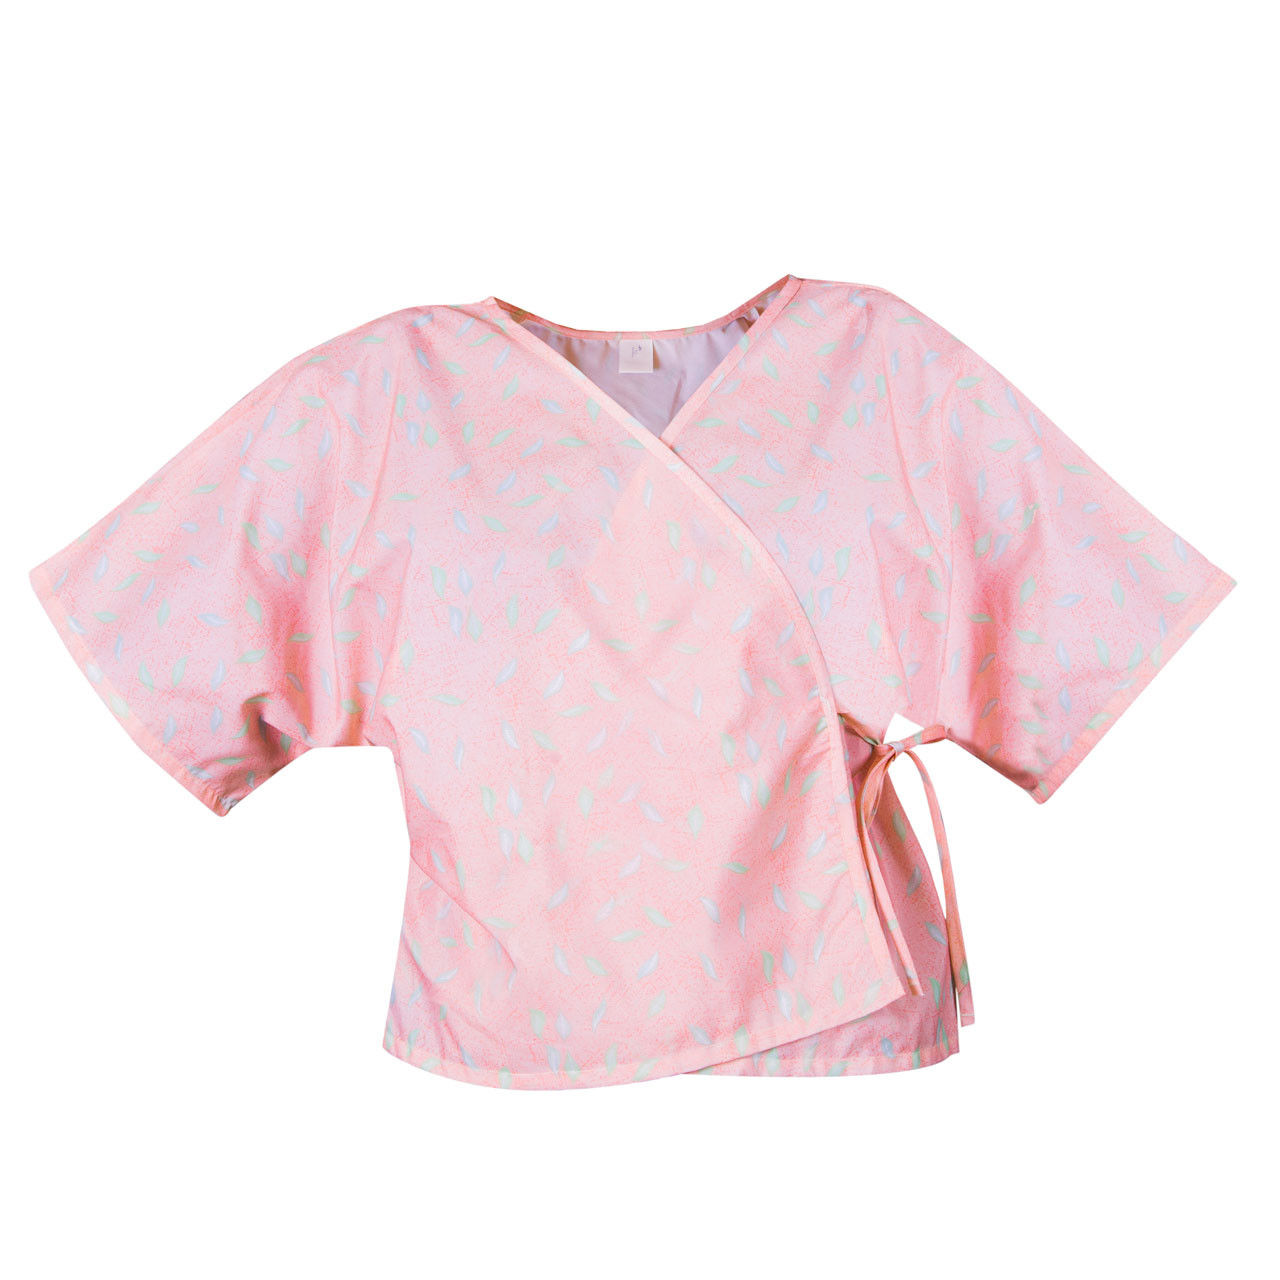 What designs of mammography capes are offered by American Dawn?